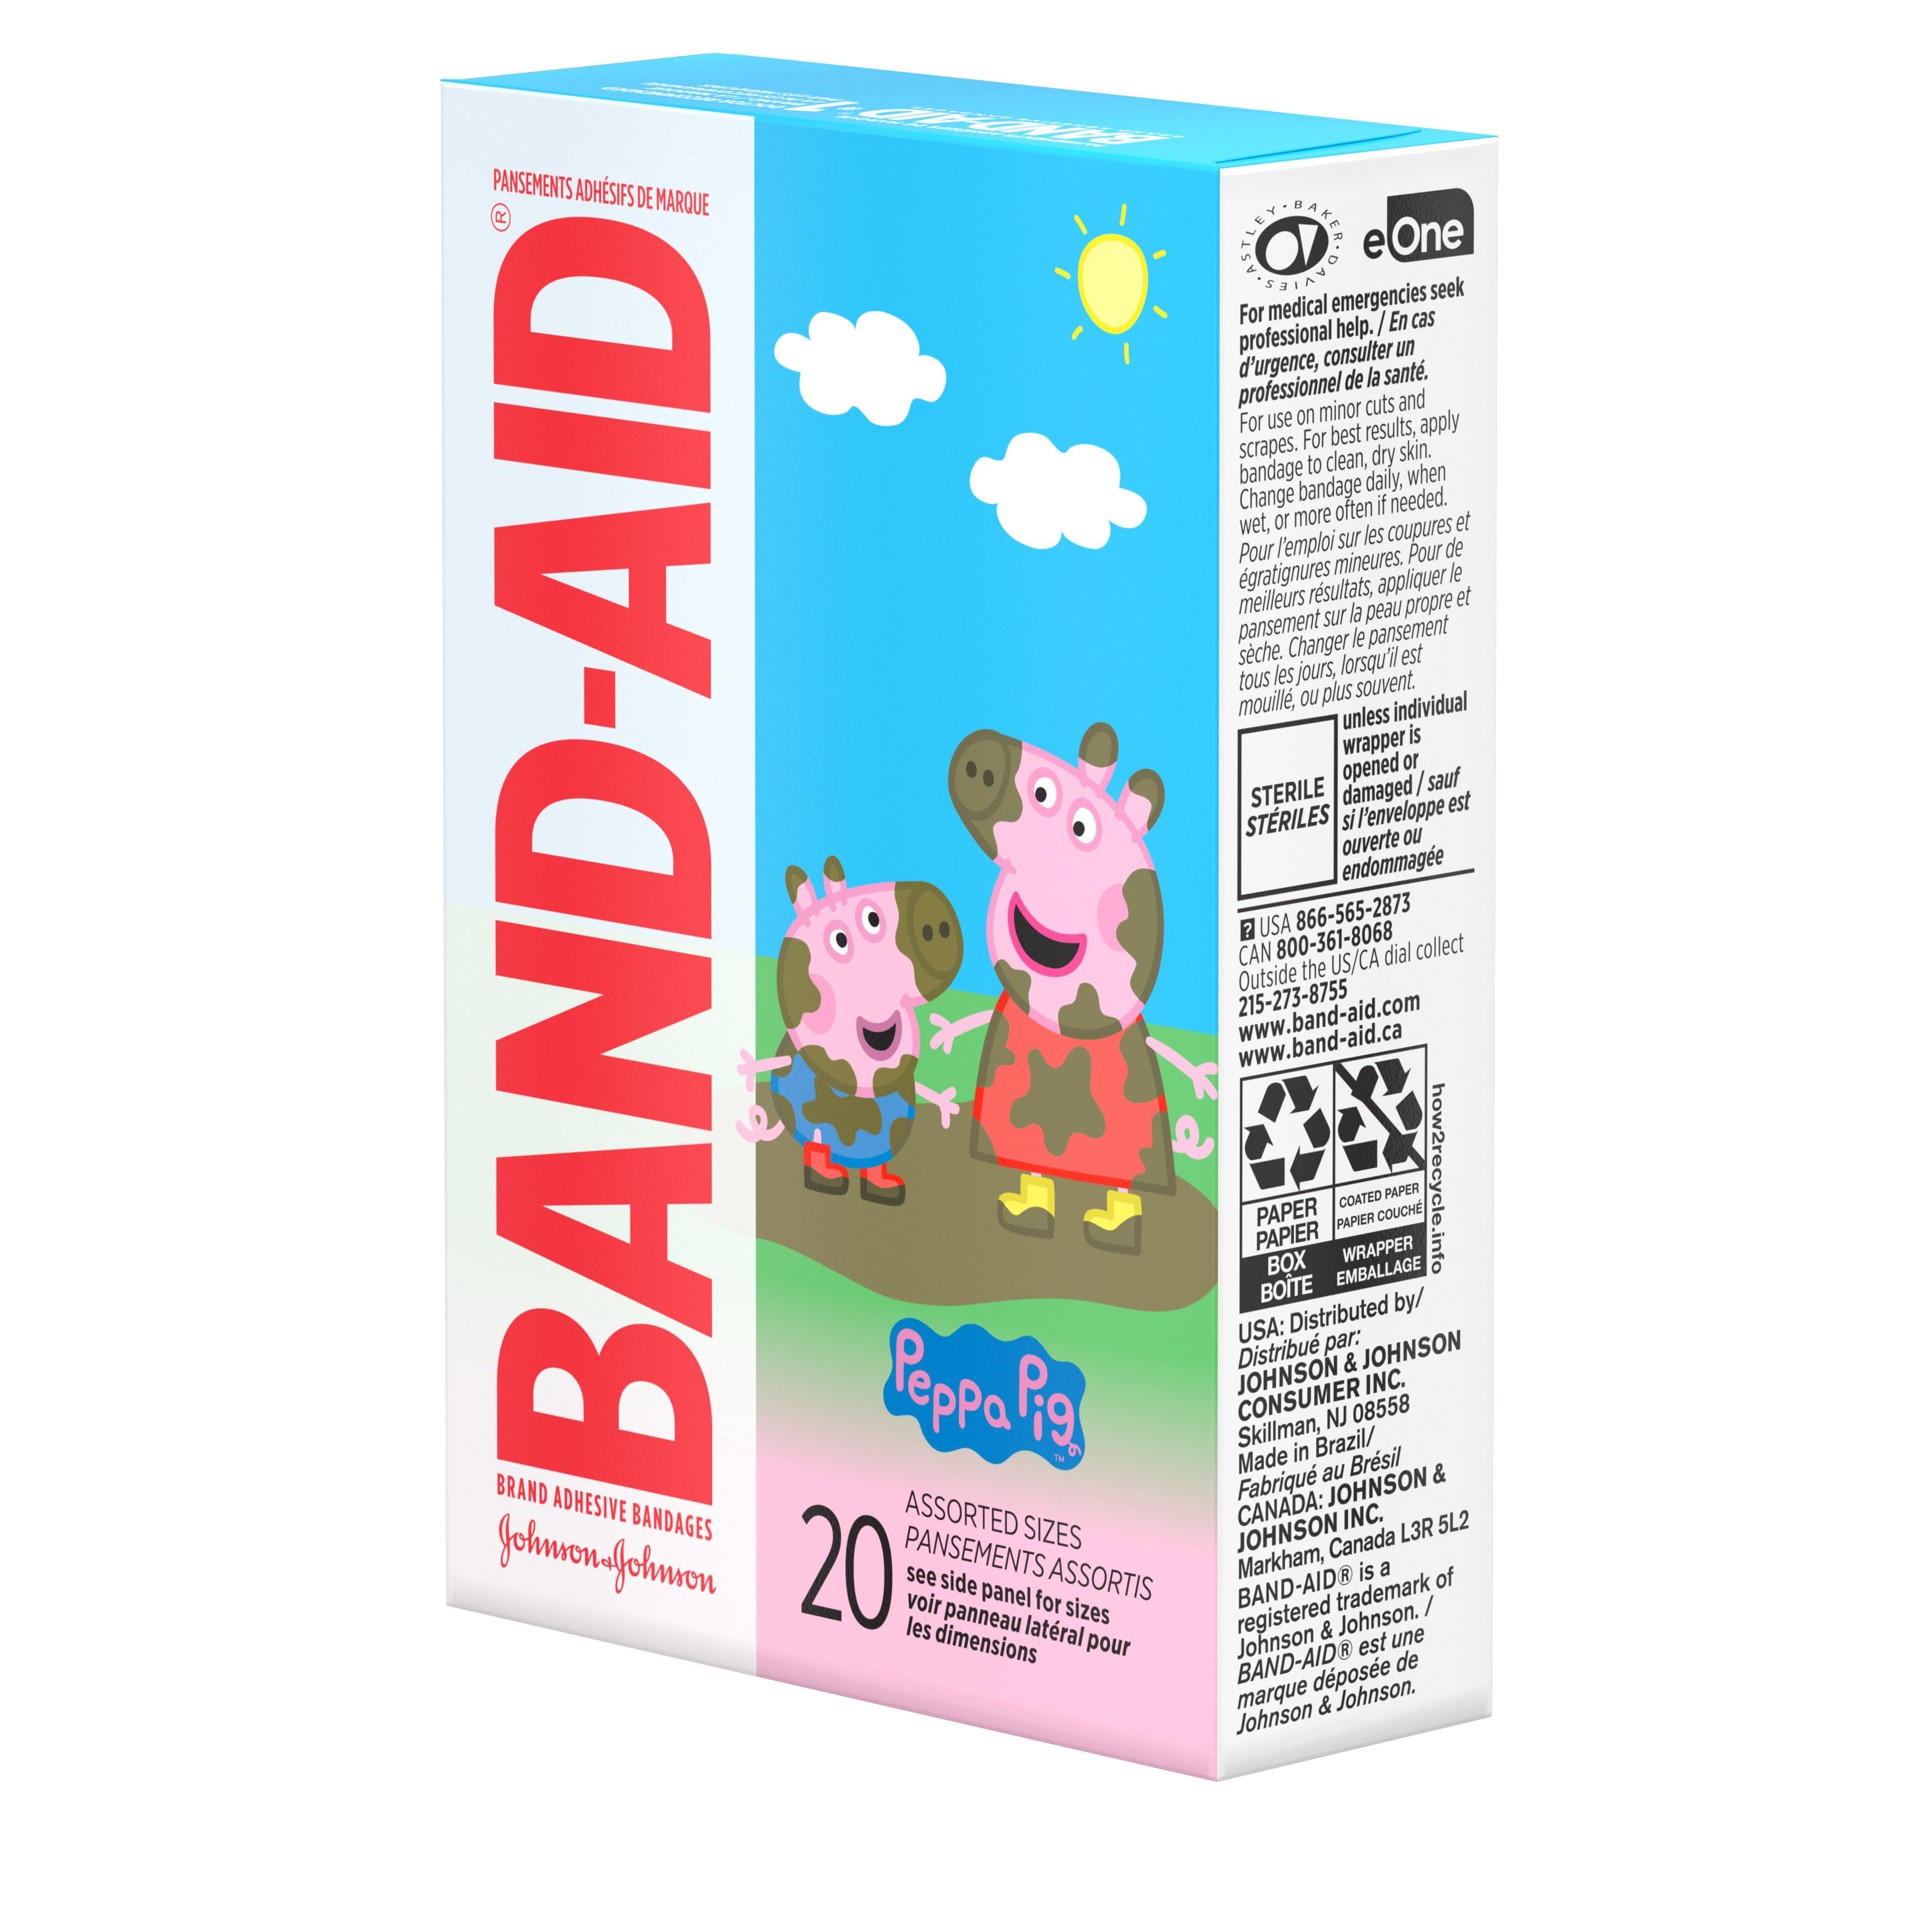 slide 7 of 8, BAND-AID Adhesive Bandages for Minor Cuts and Scrapes, Featuring Peppa Pig for Kids, Assorted Sizes 20 ct, 20 ct